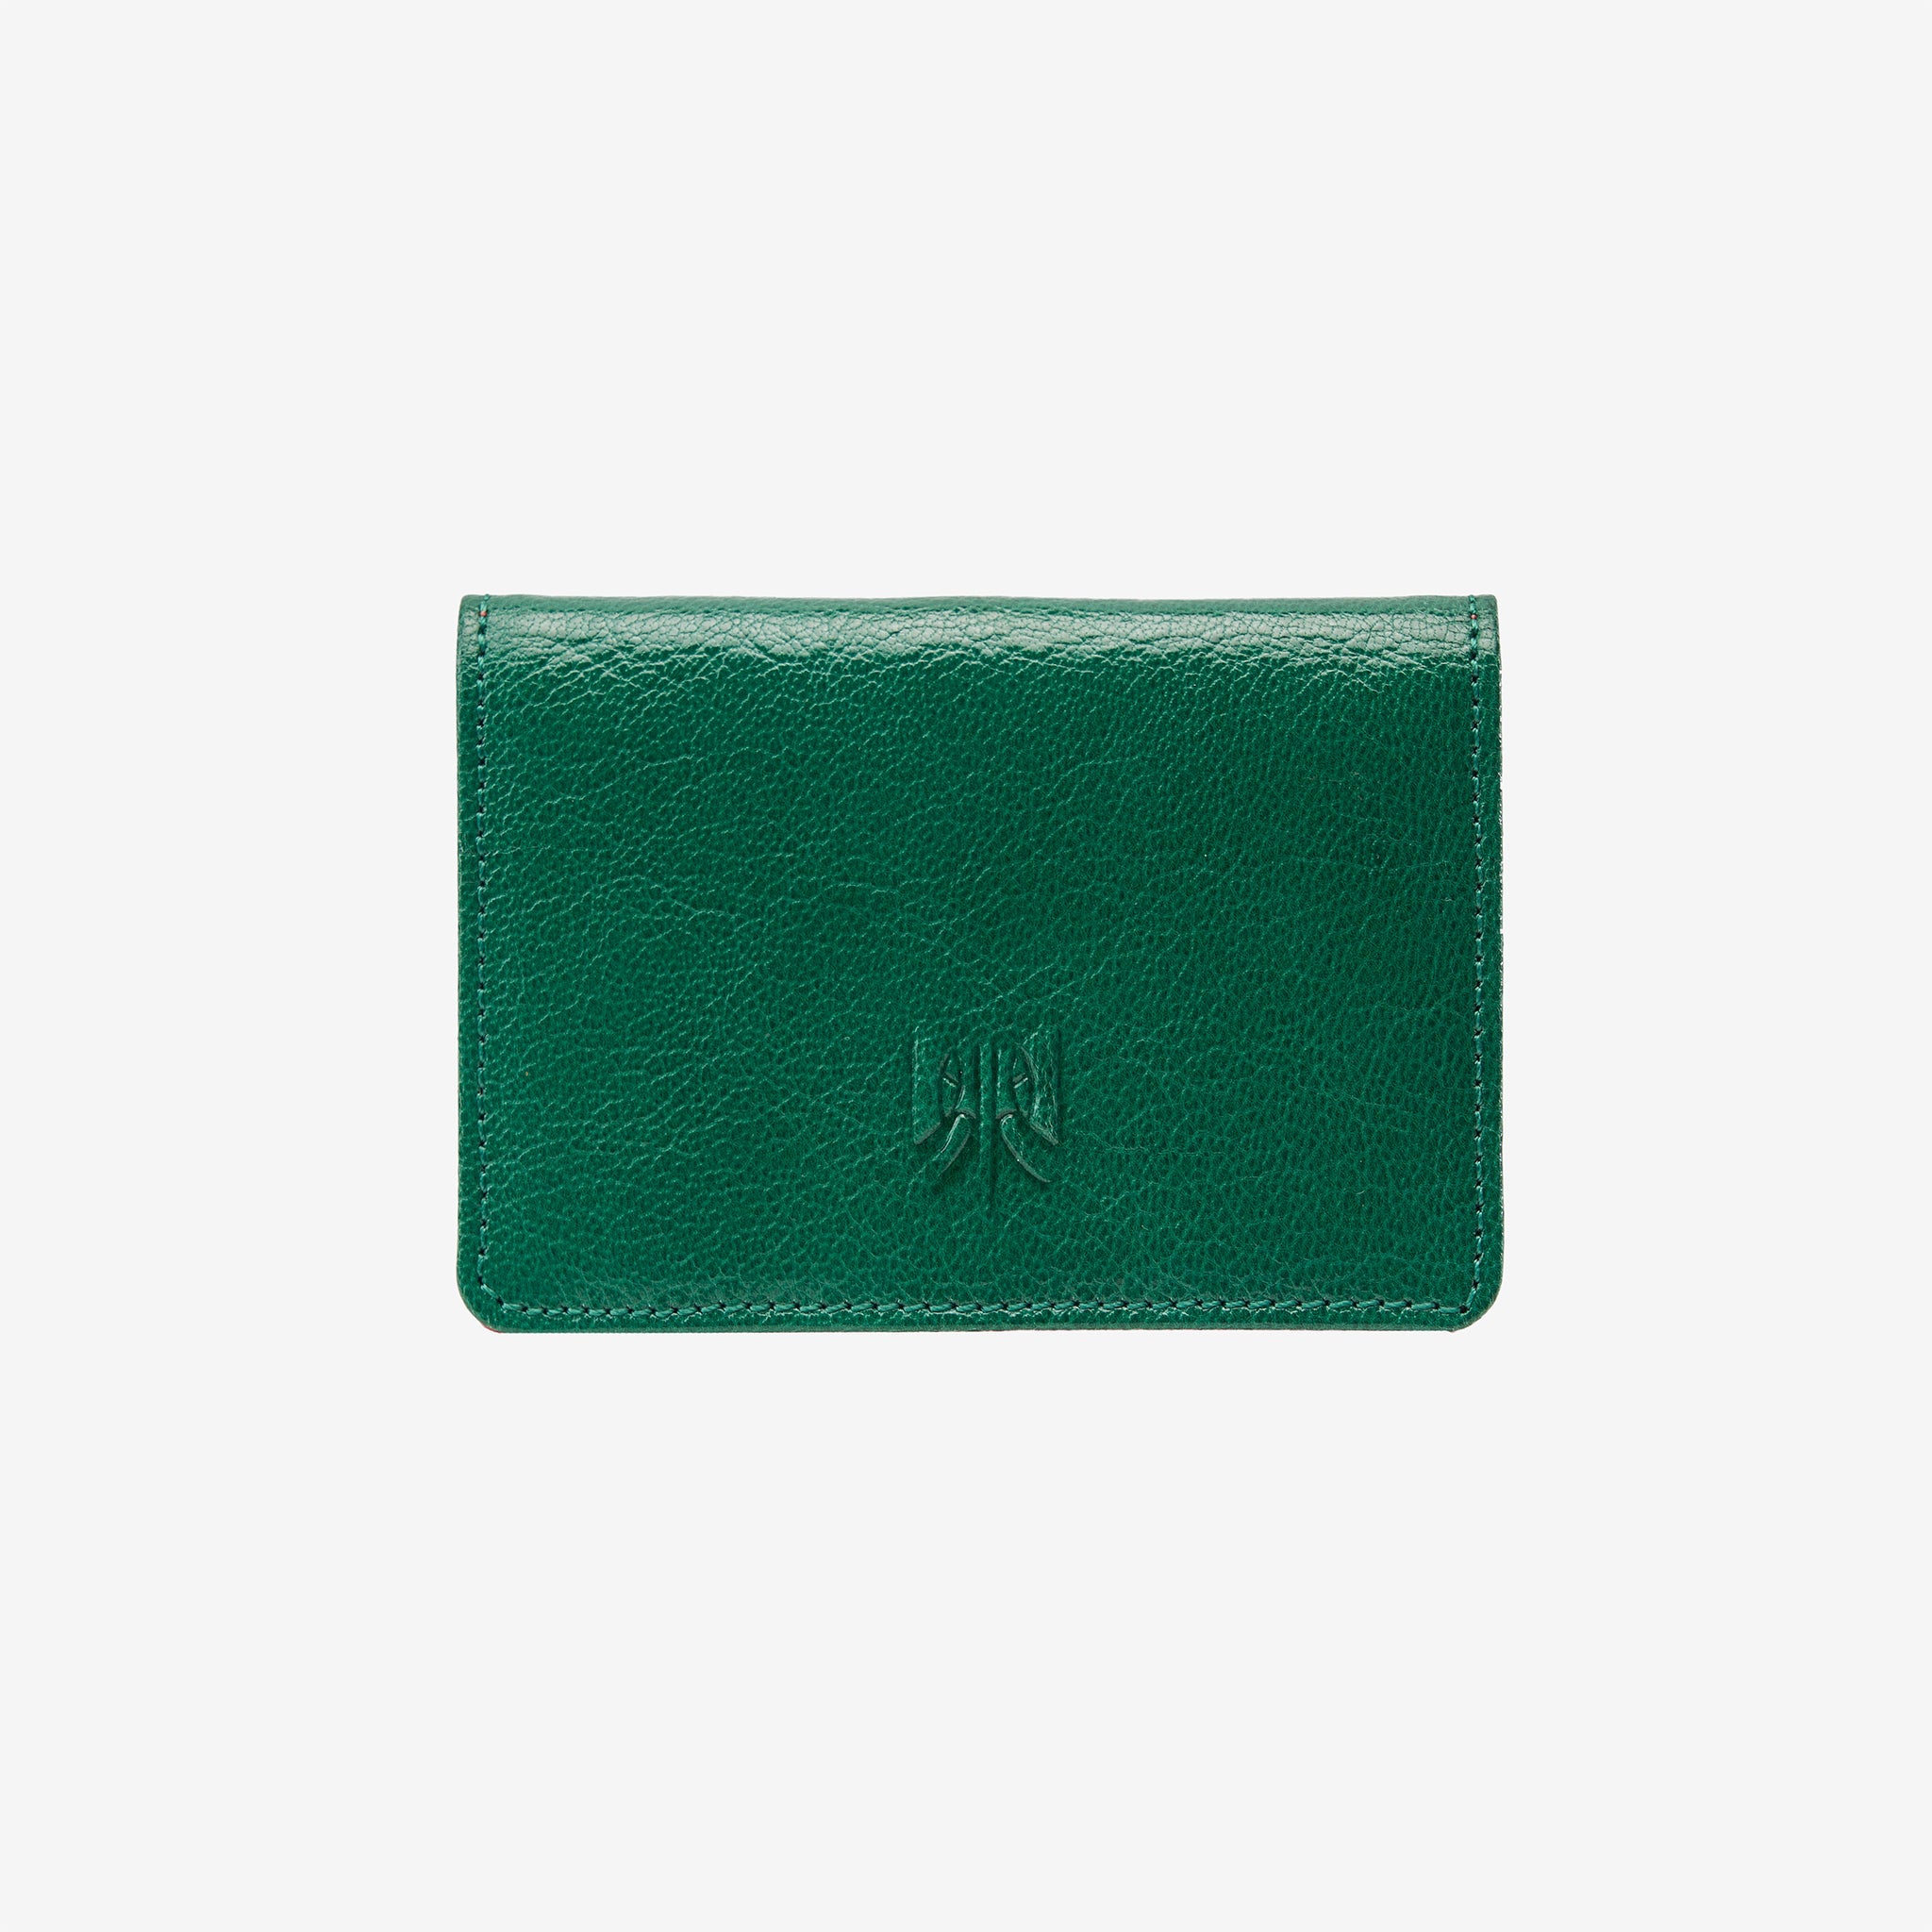 Siam Gusseted Business Card Case